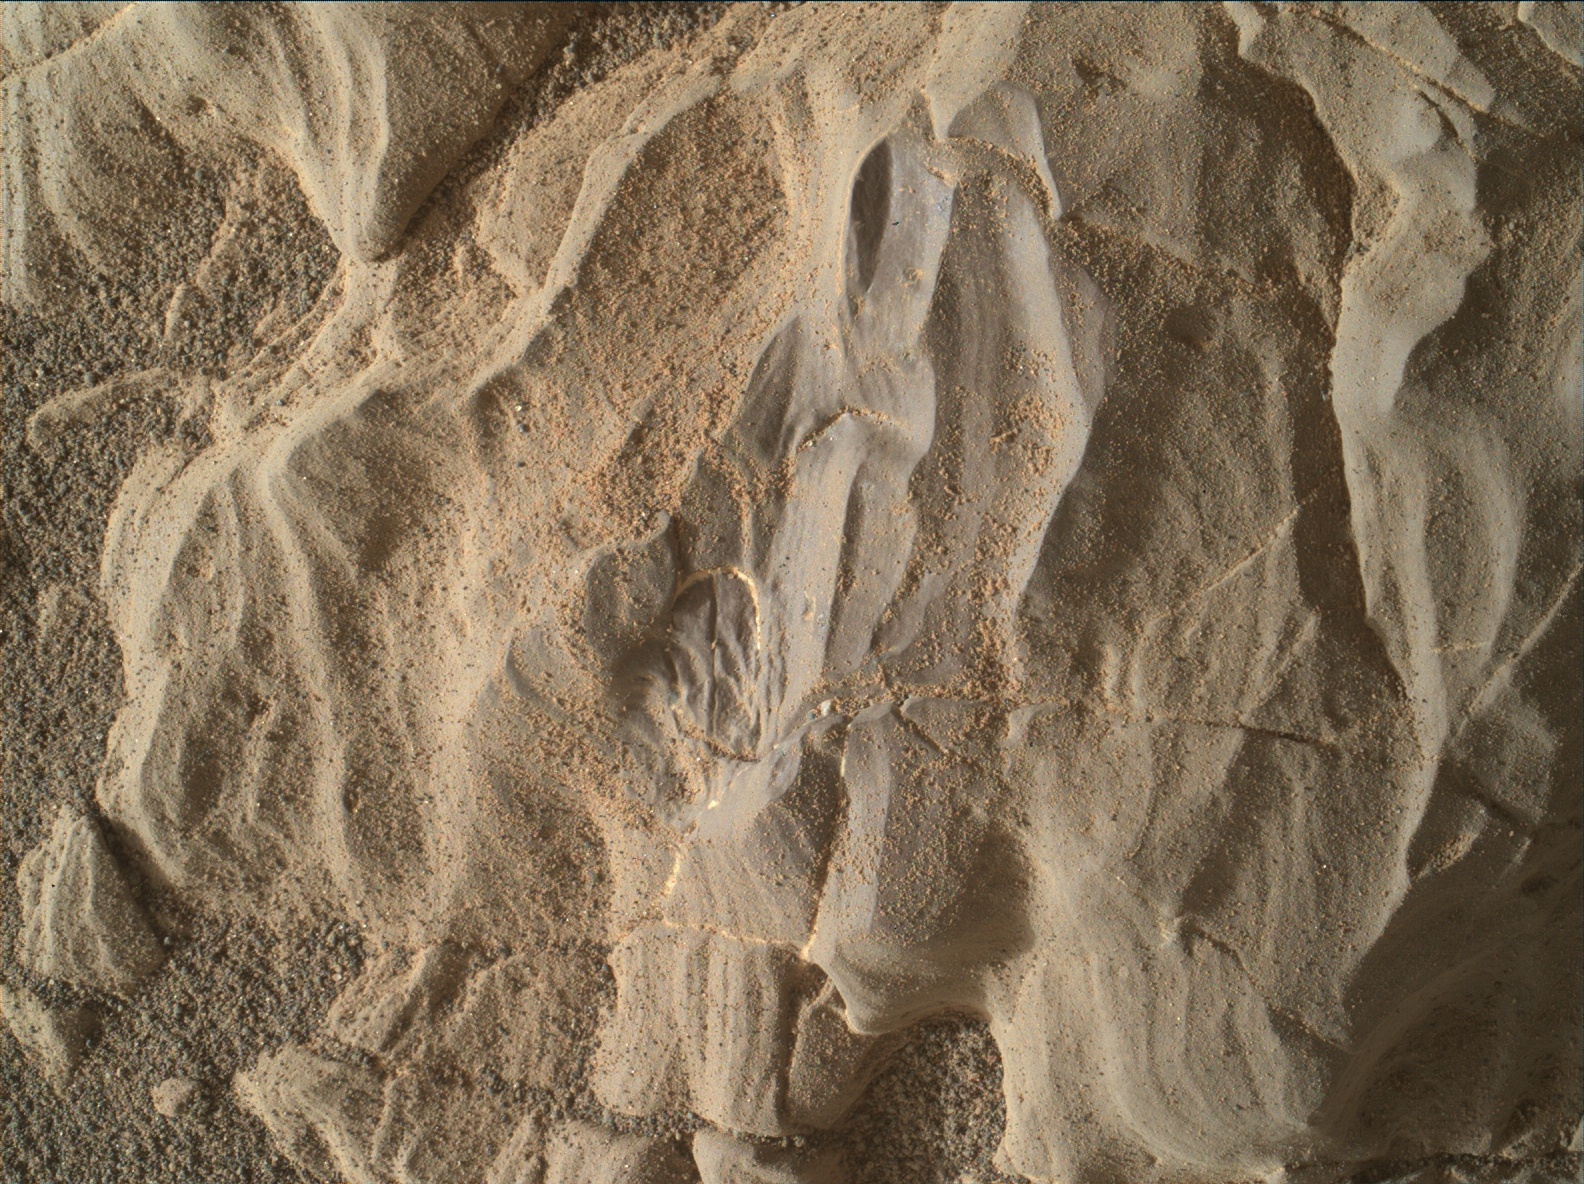 Nasa's Mars rover Curiosity acquired this image using its Mars Hand Lens Imager (MAHLI) on Sol 1990